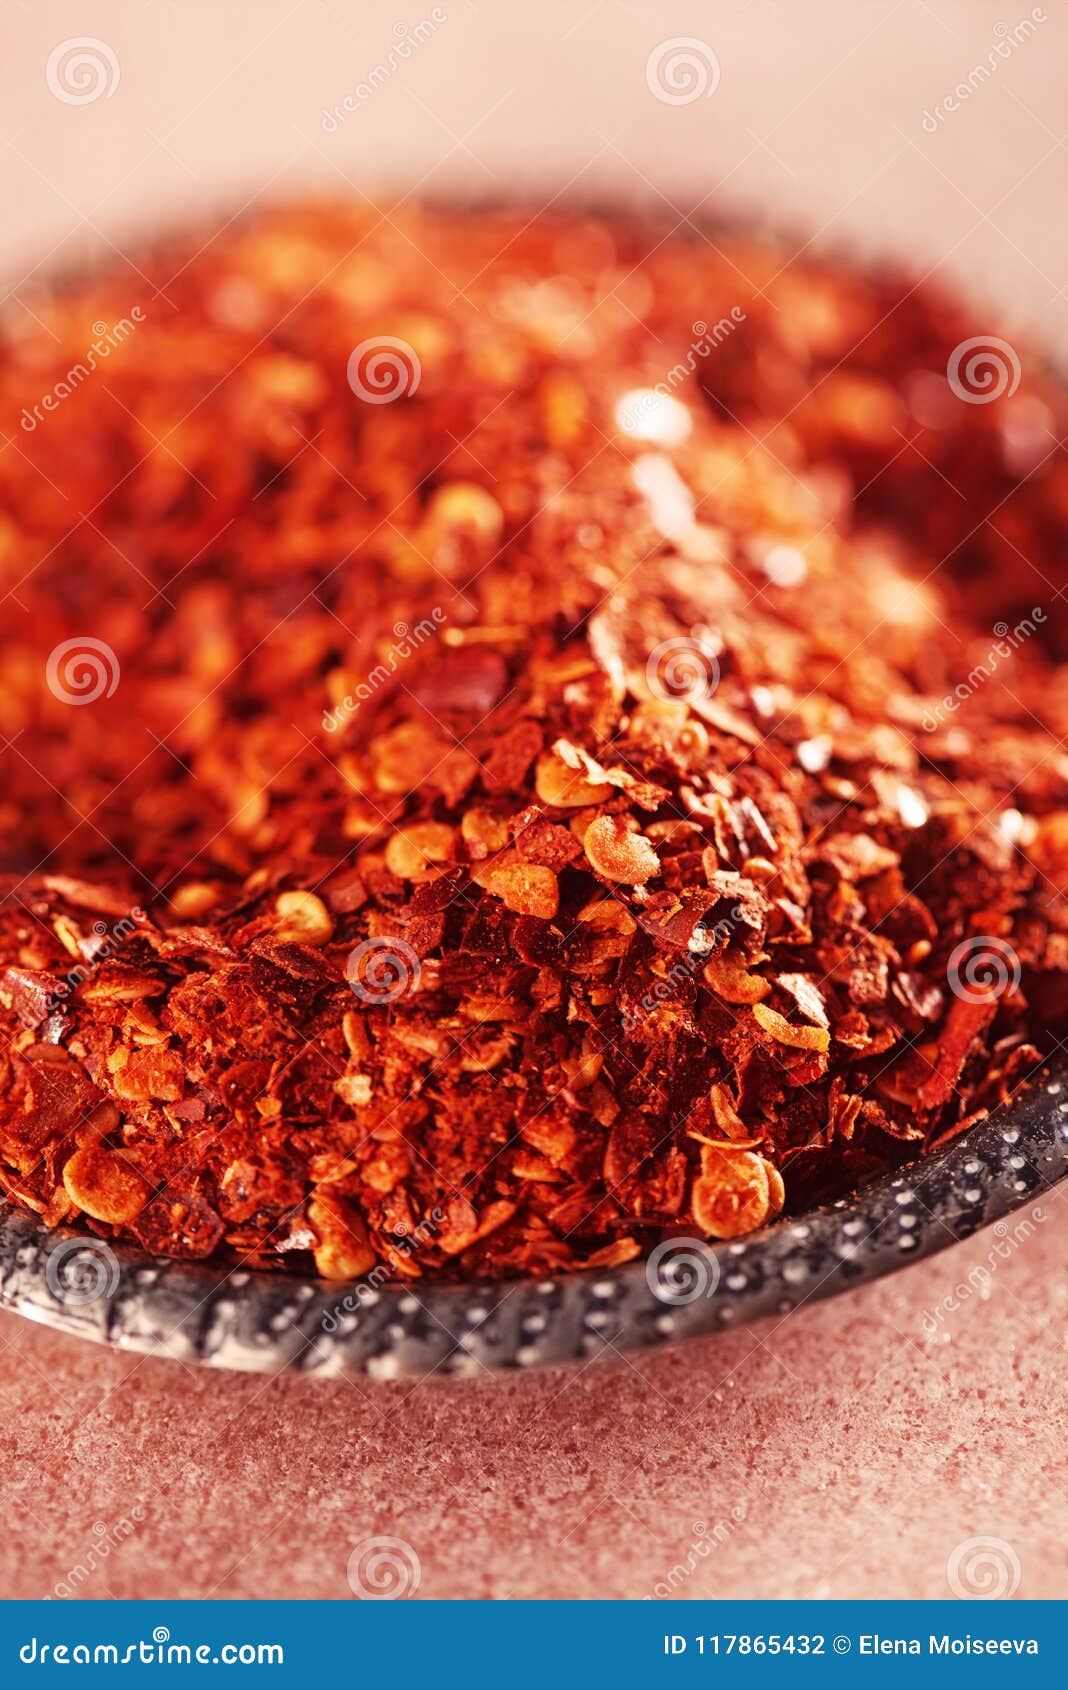 calabrian chilli pepper flakes or little devil